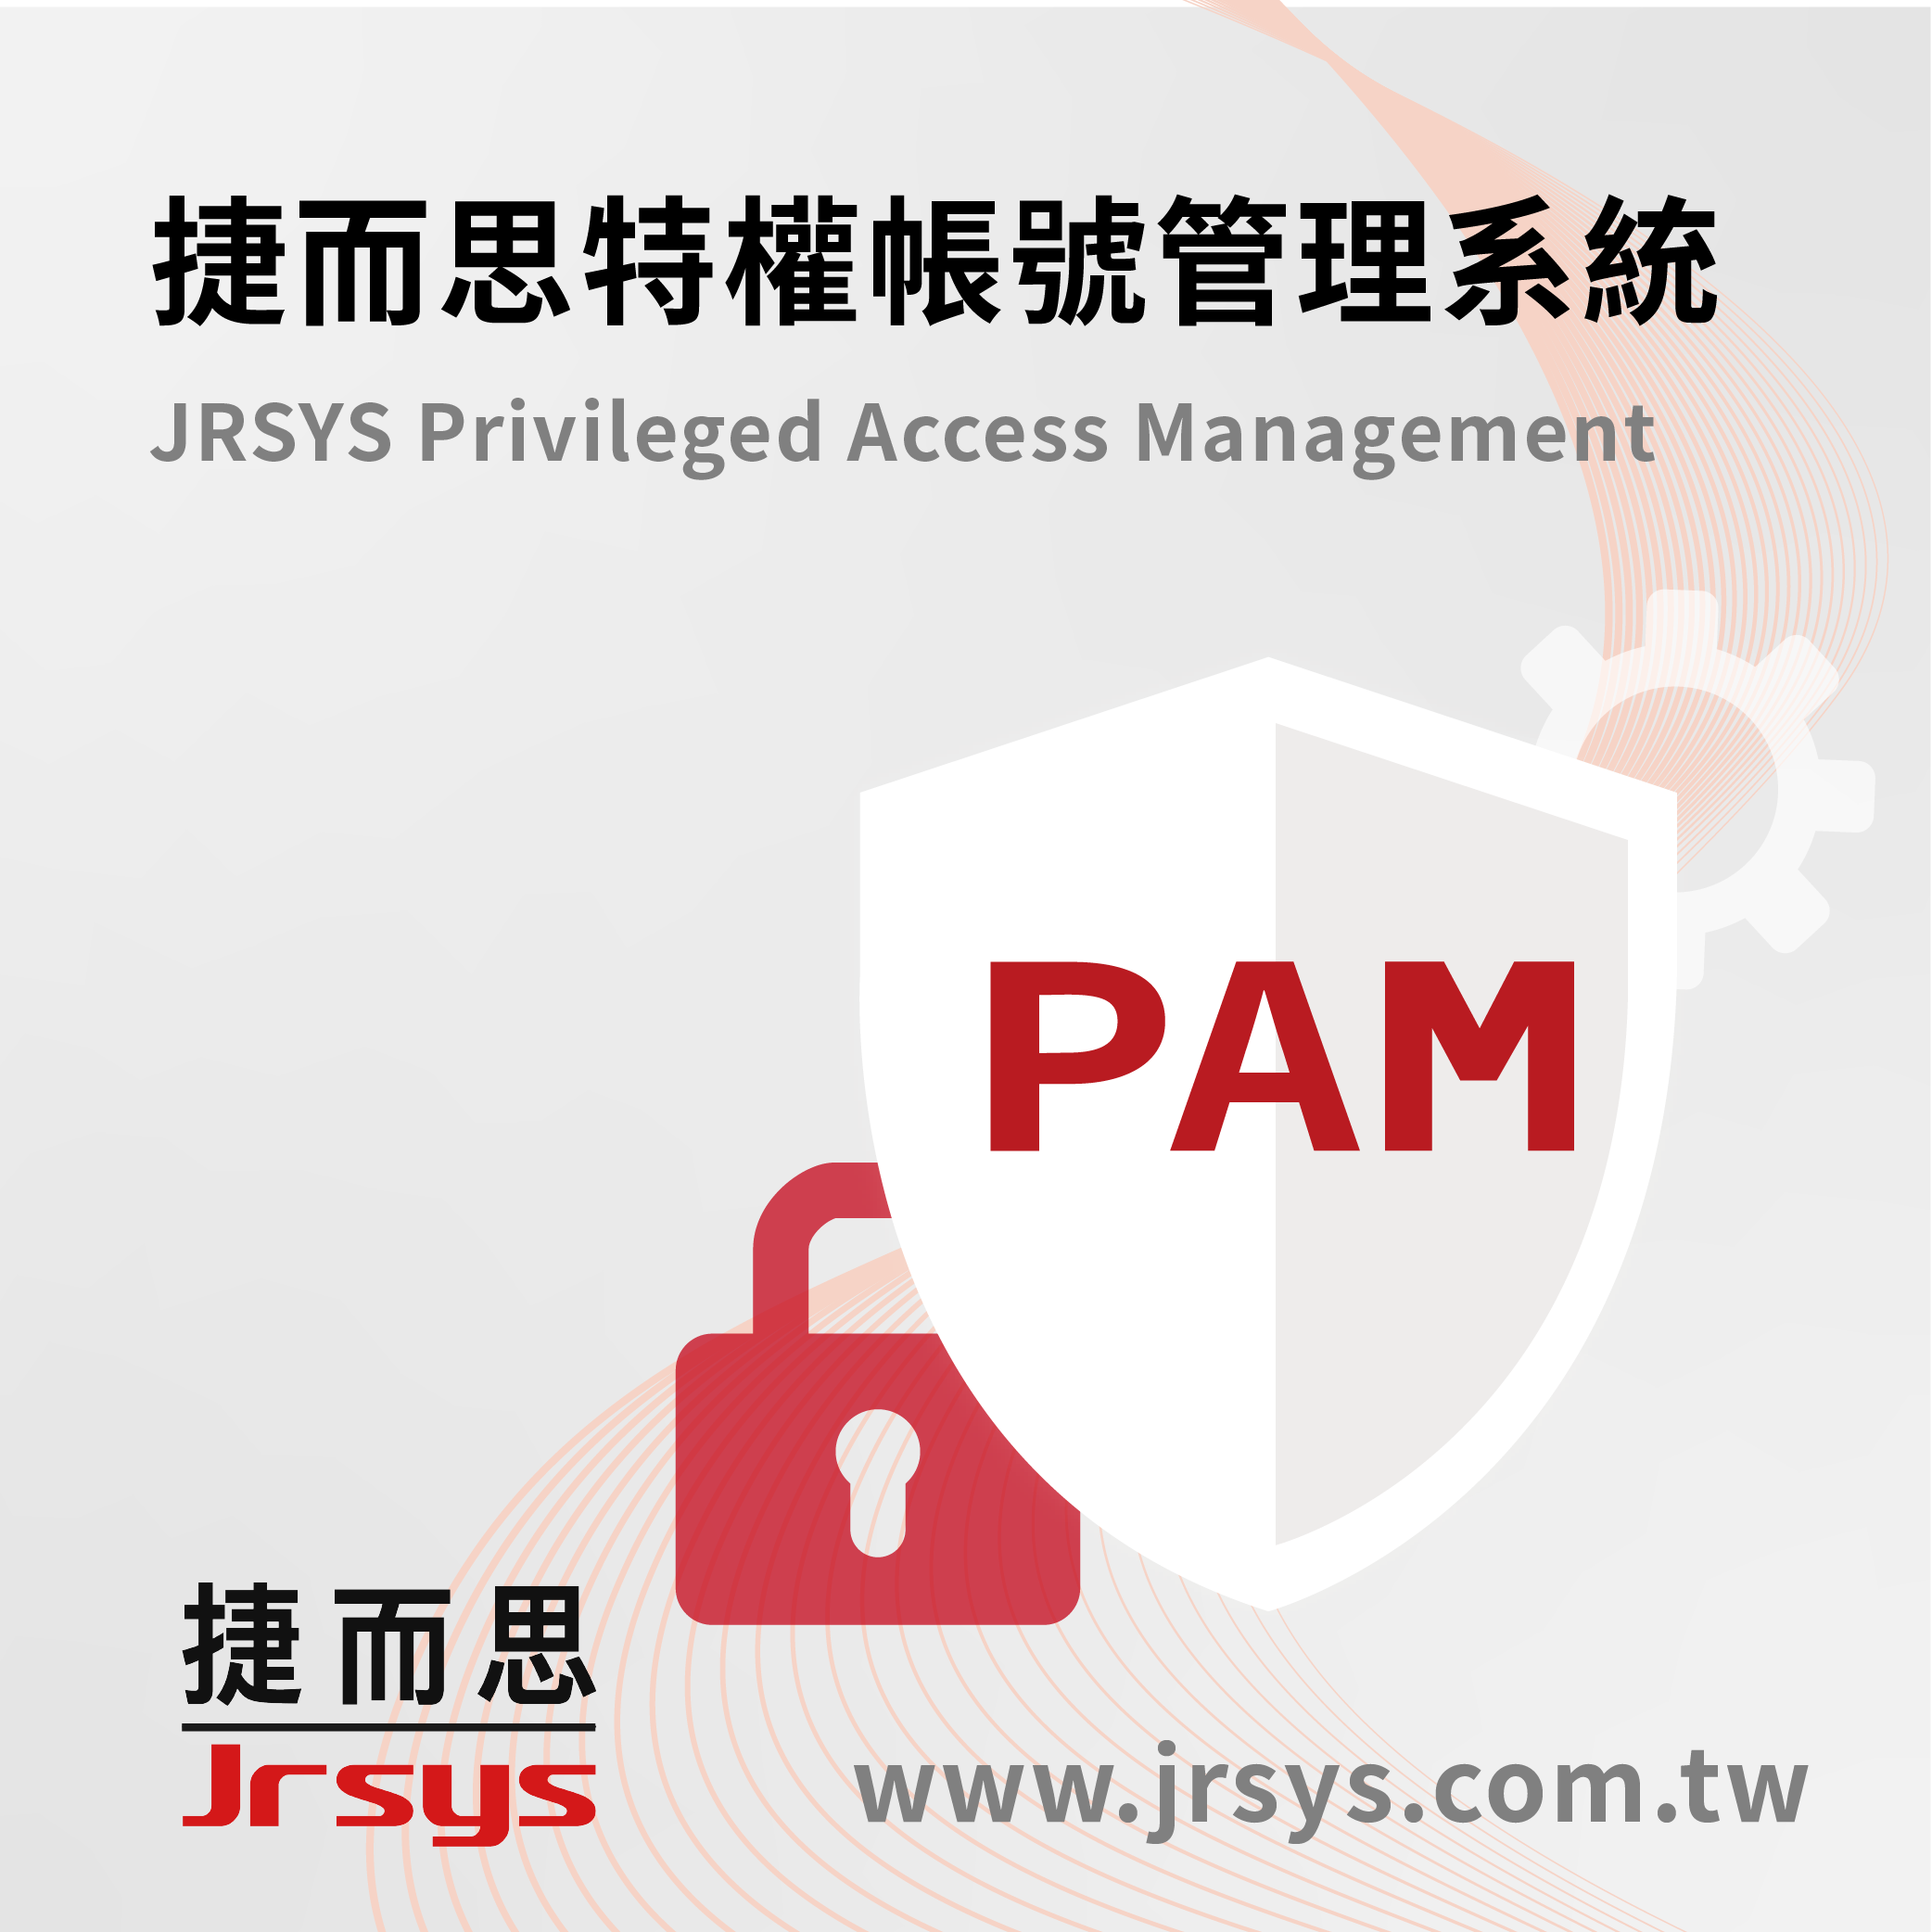 JRSYS Priviledged Access Management